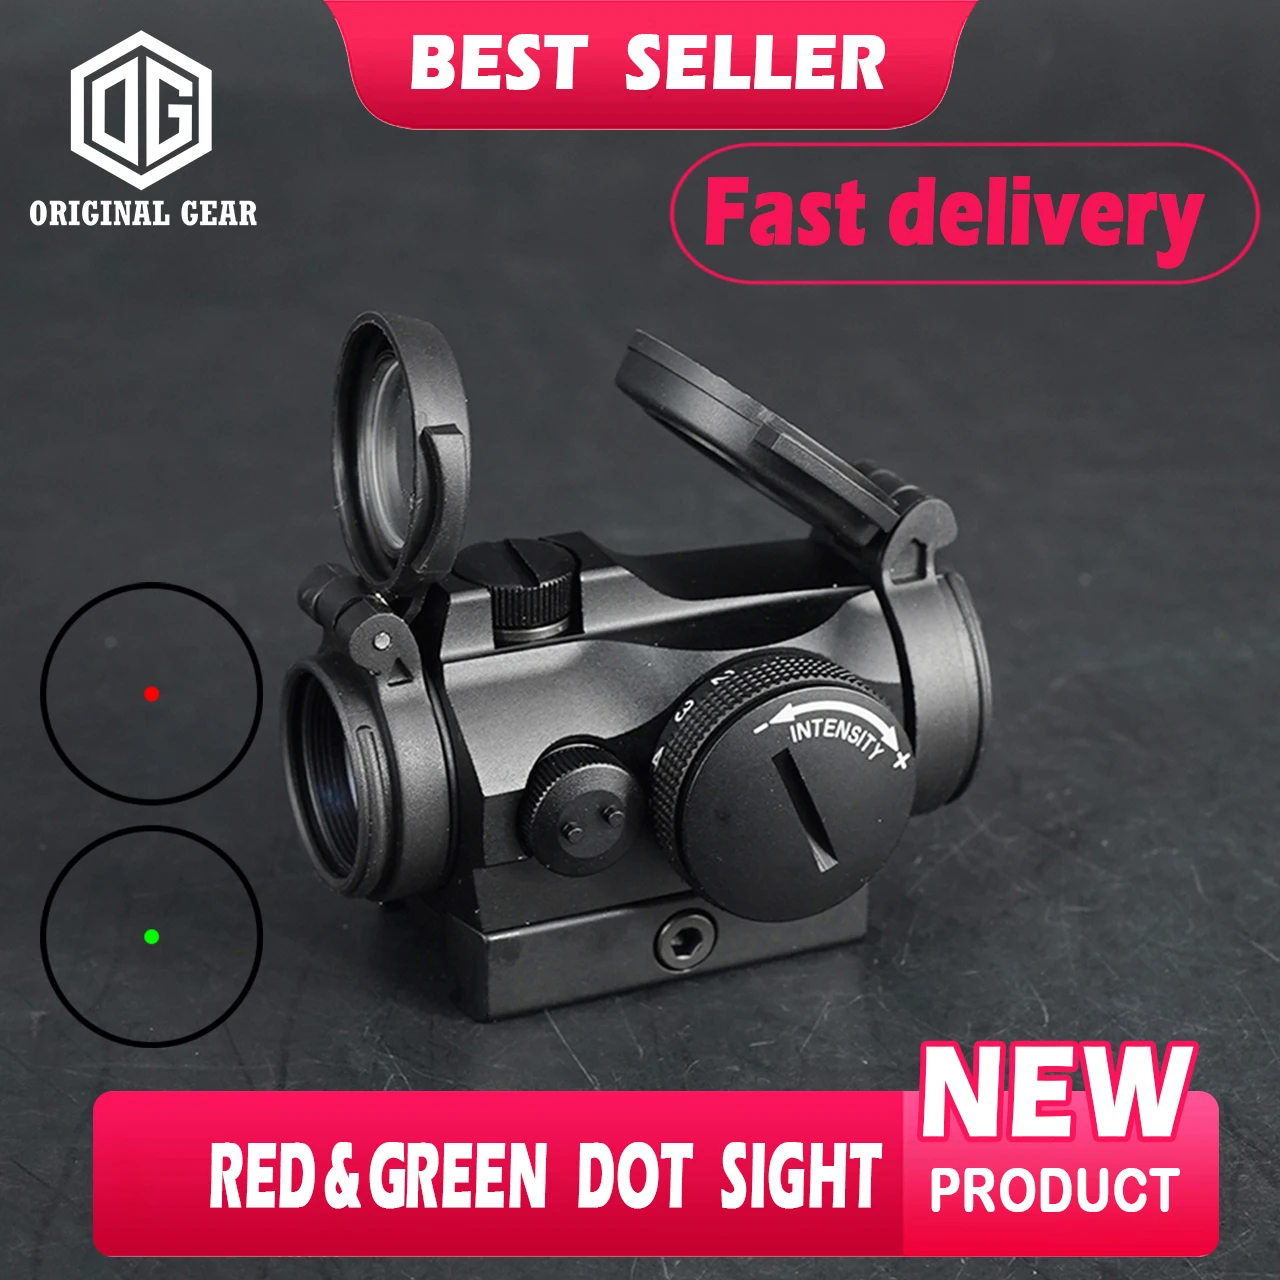 Green And Red Dot Optical Sight Tactical Airsoft Tactics Air rifle Riflescope Reddot Accessories 2.26/1.93/LT660 Scope Mount